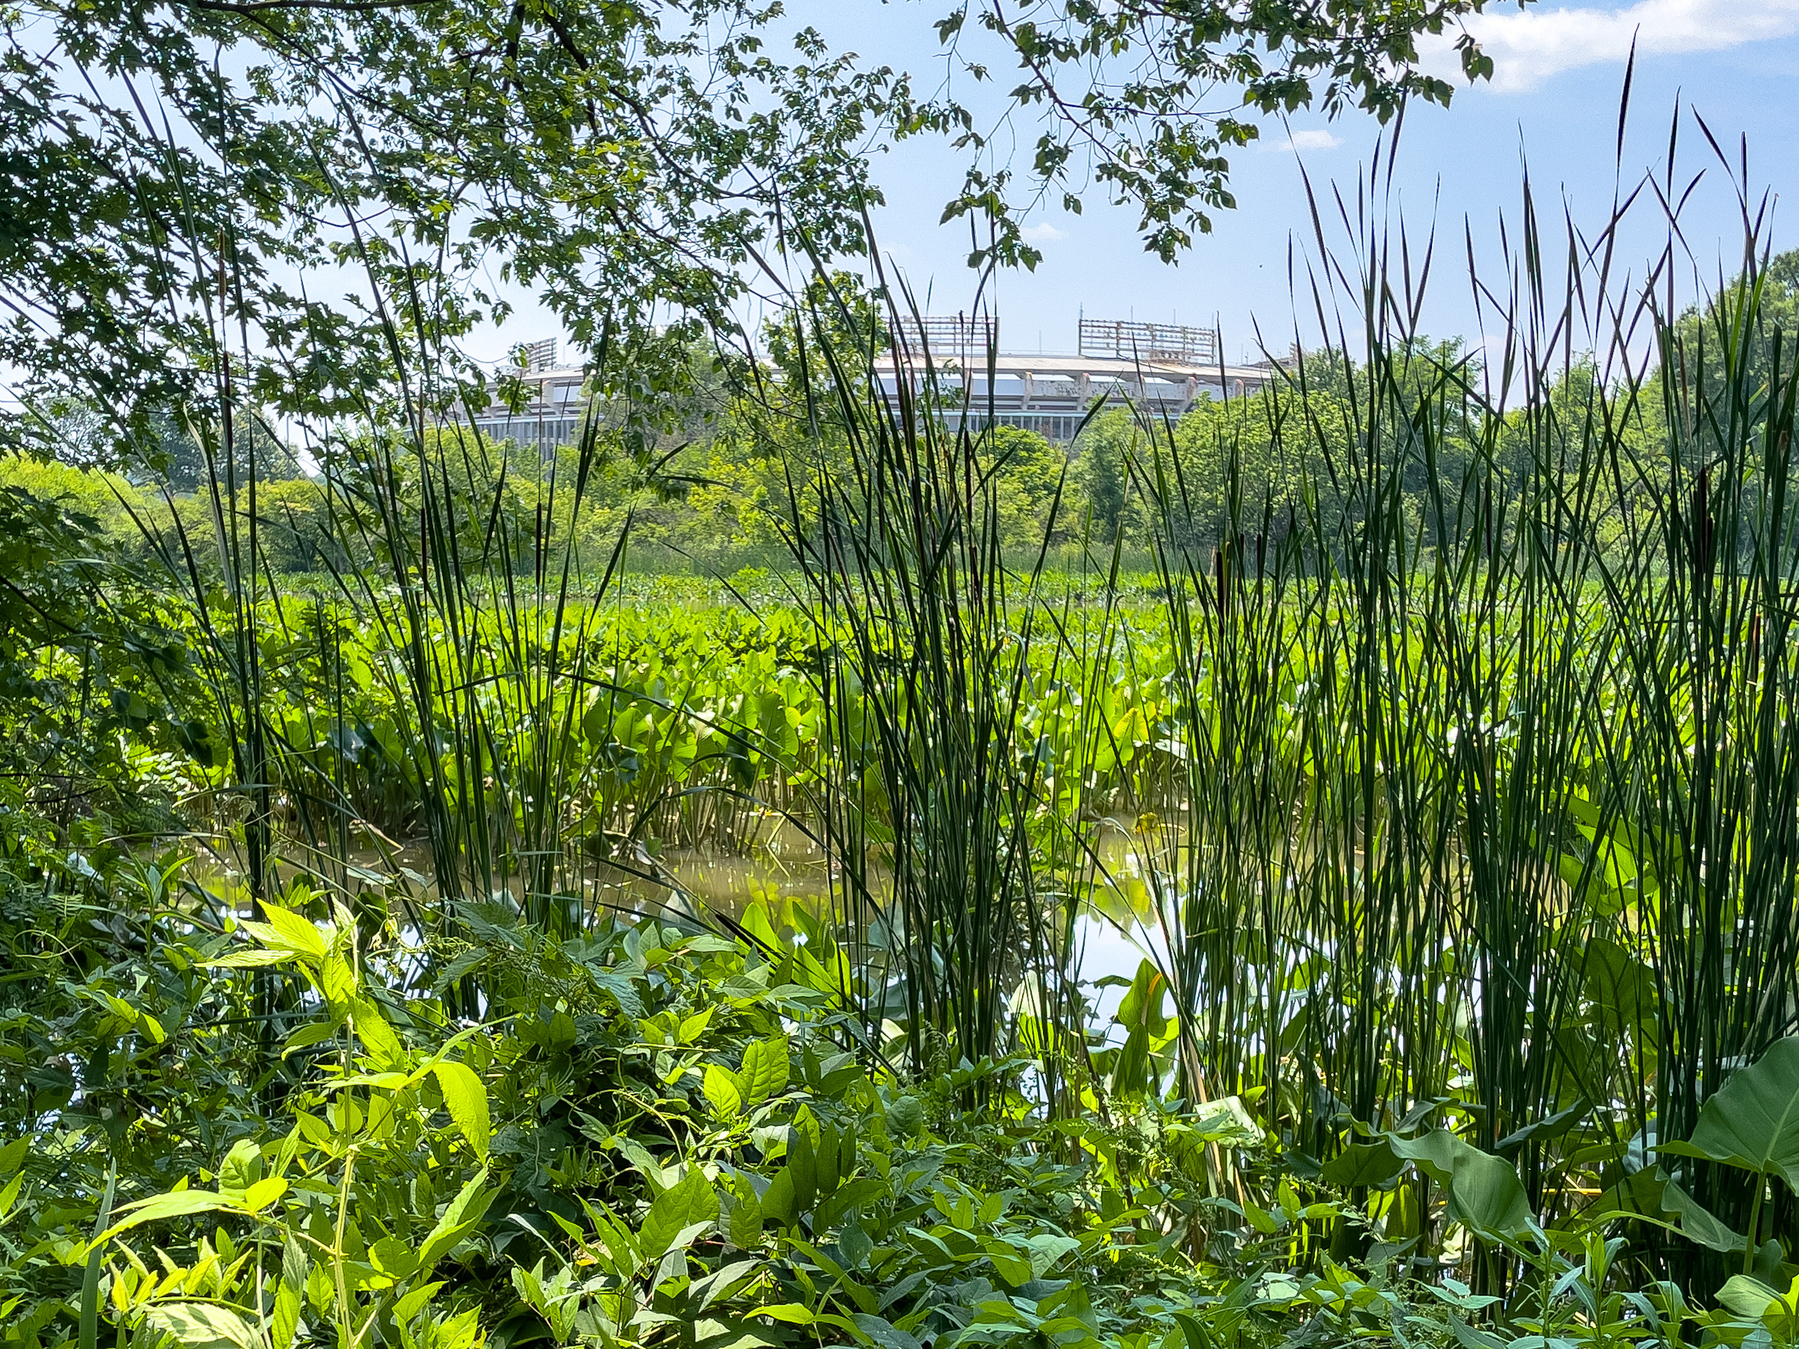 DC’s RFK Stadium from Heritage Island in the Anacostia river.